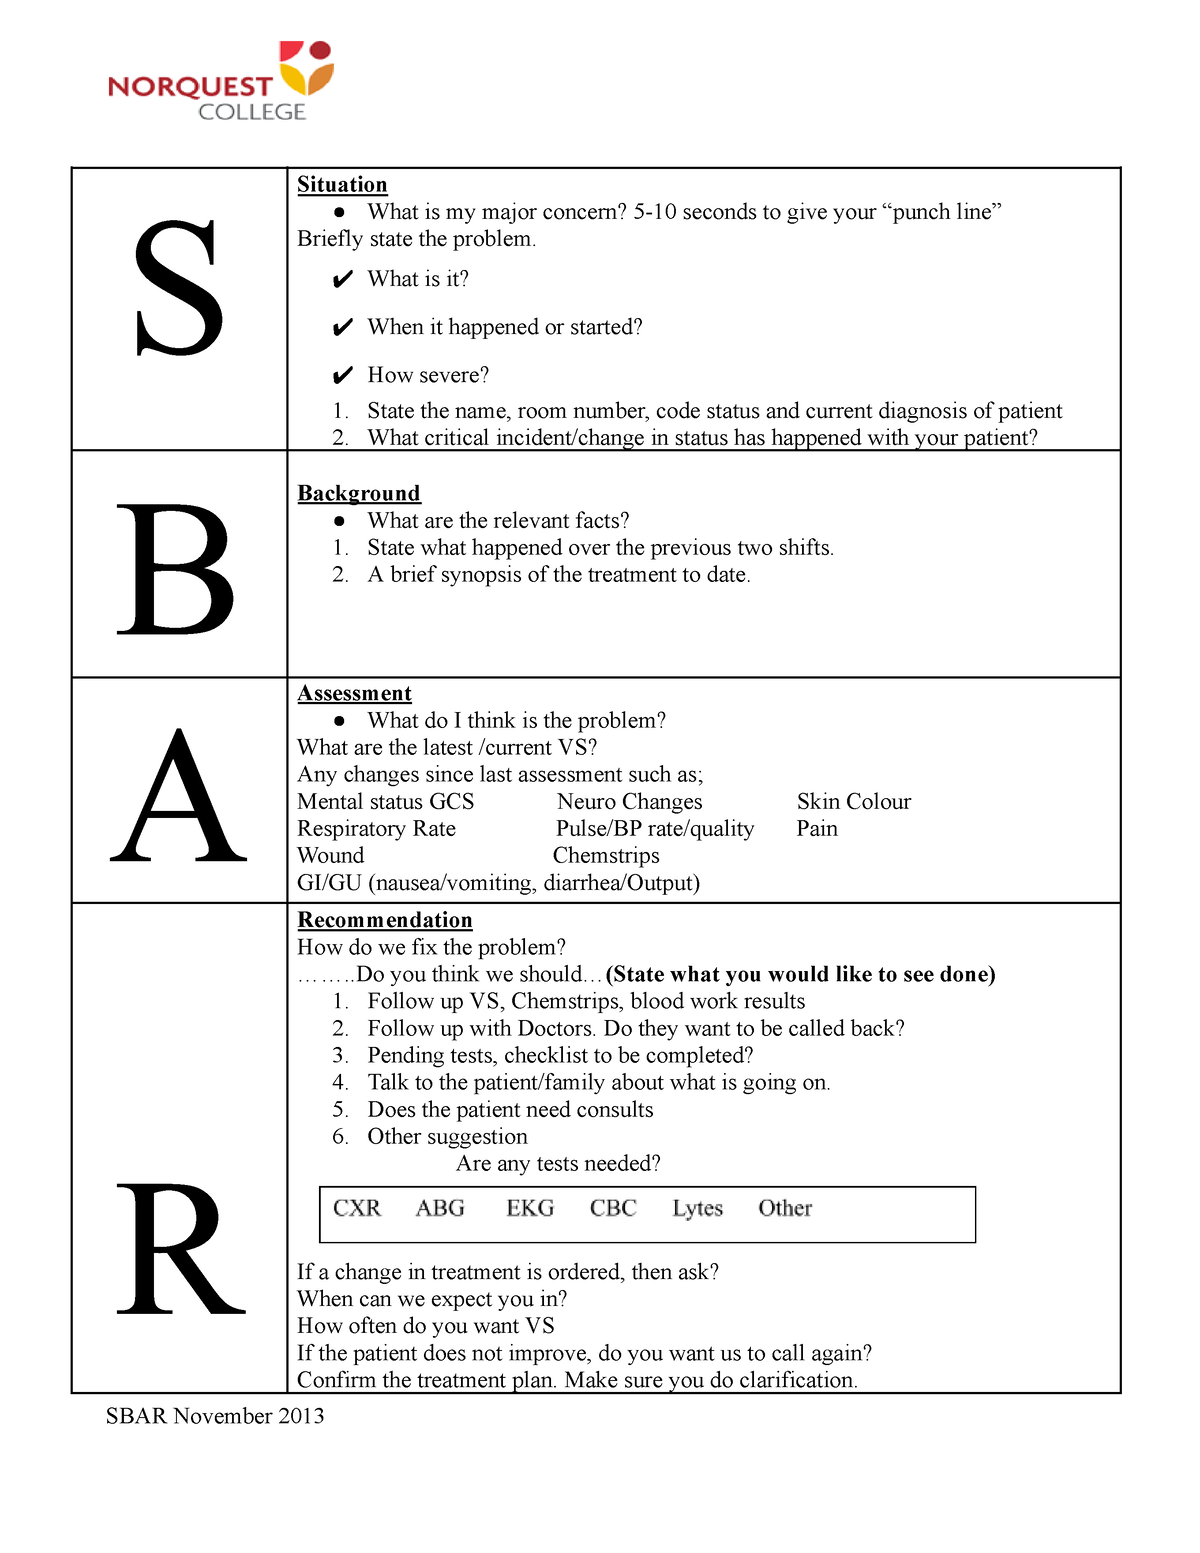 SBAR - SBAR - S Situation What is my major concern? 5-10 seconds to ...